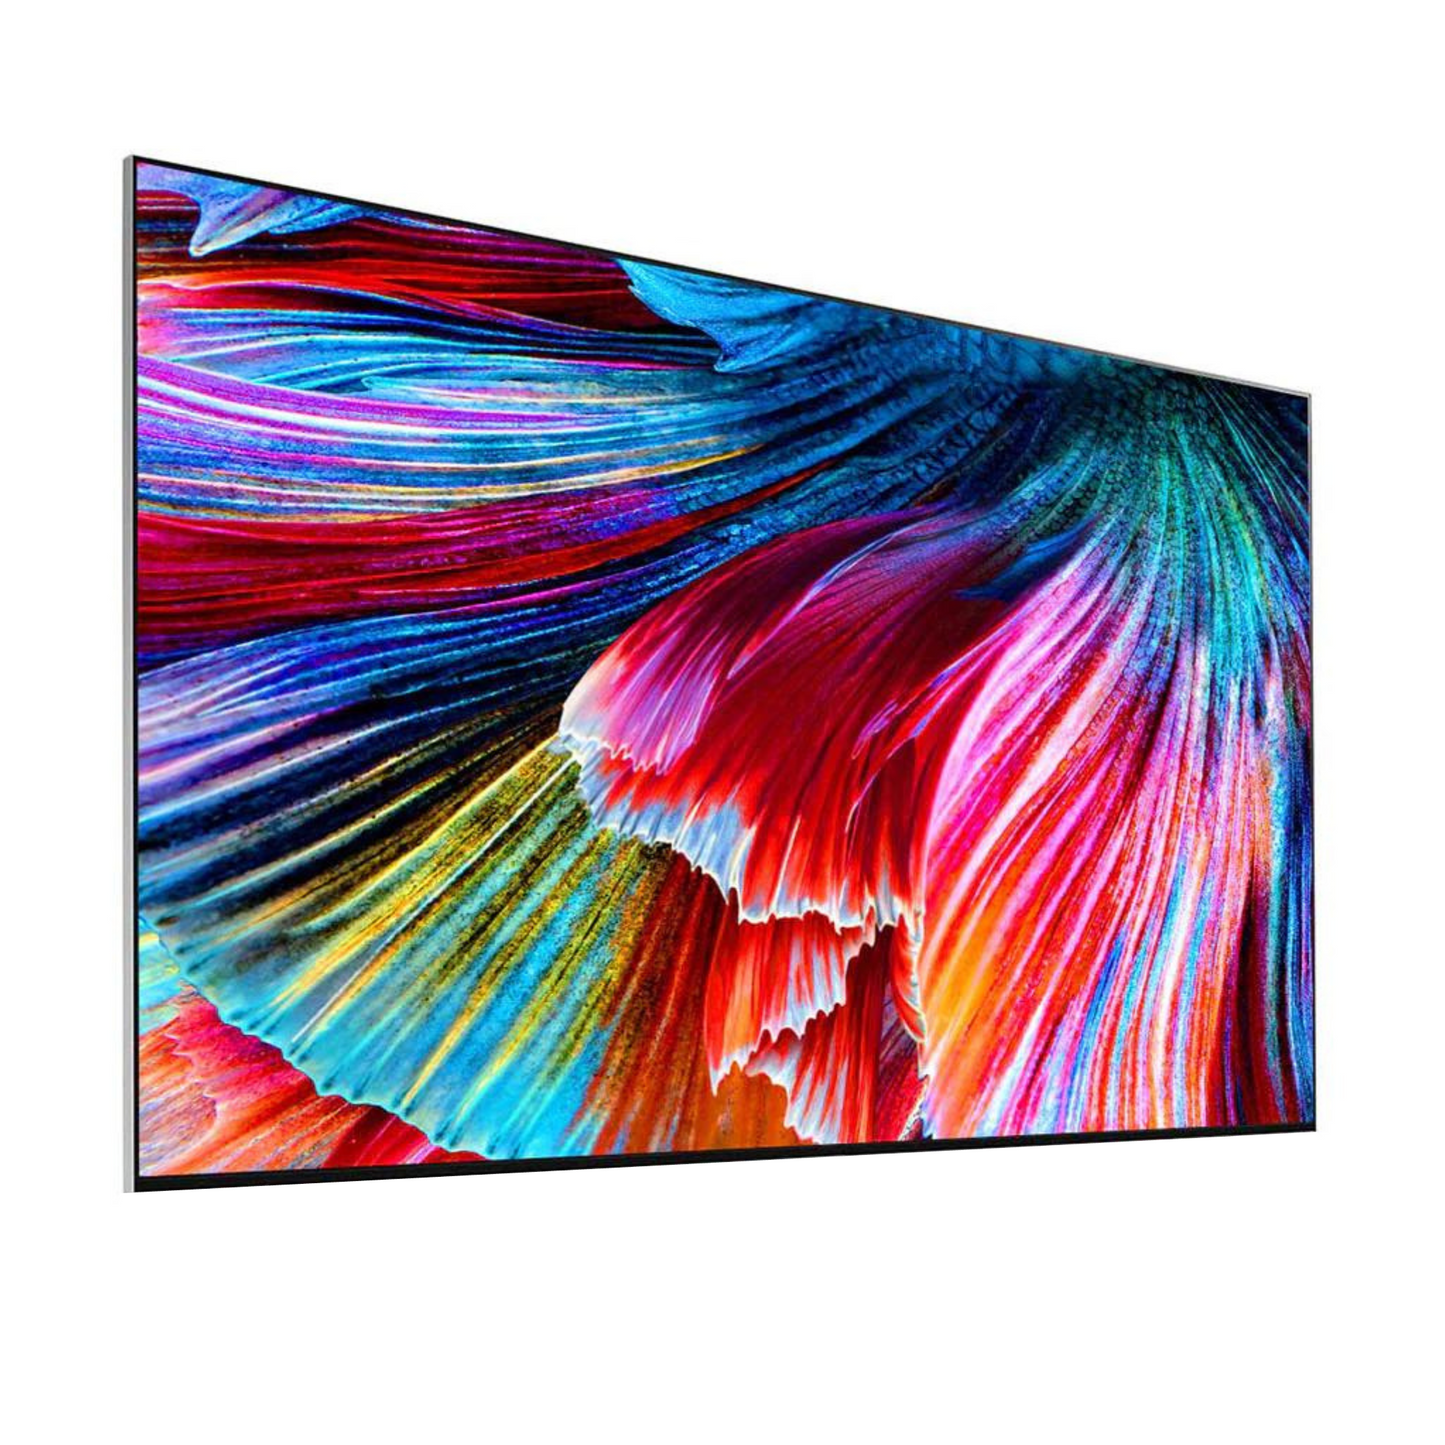 LG 86 inch Smart QNED TV - 8K, 86QNED99